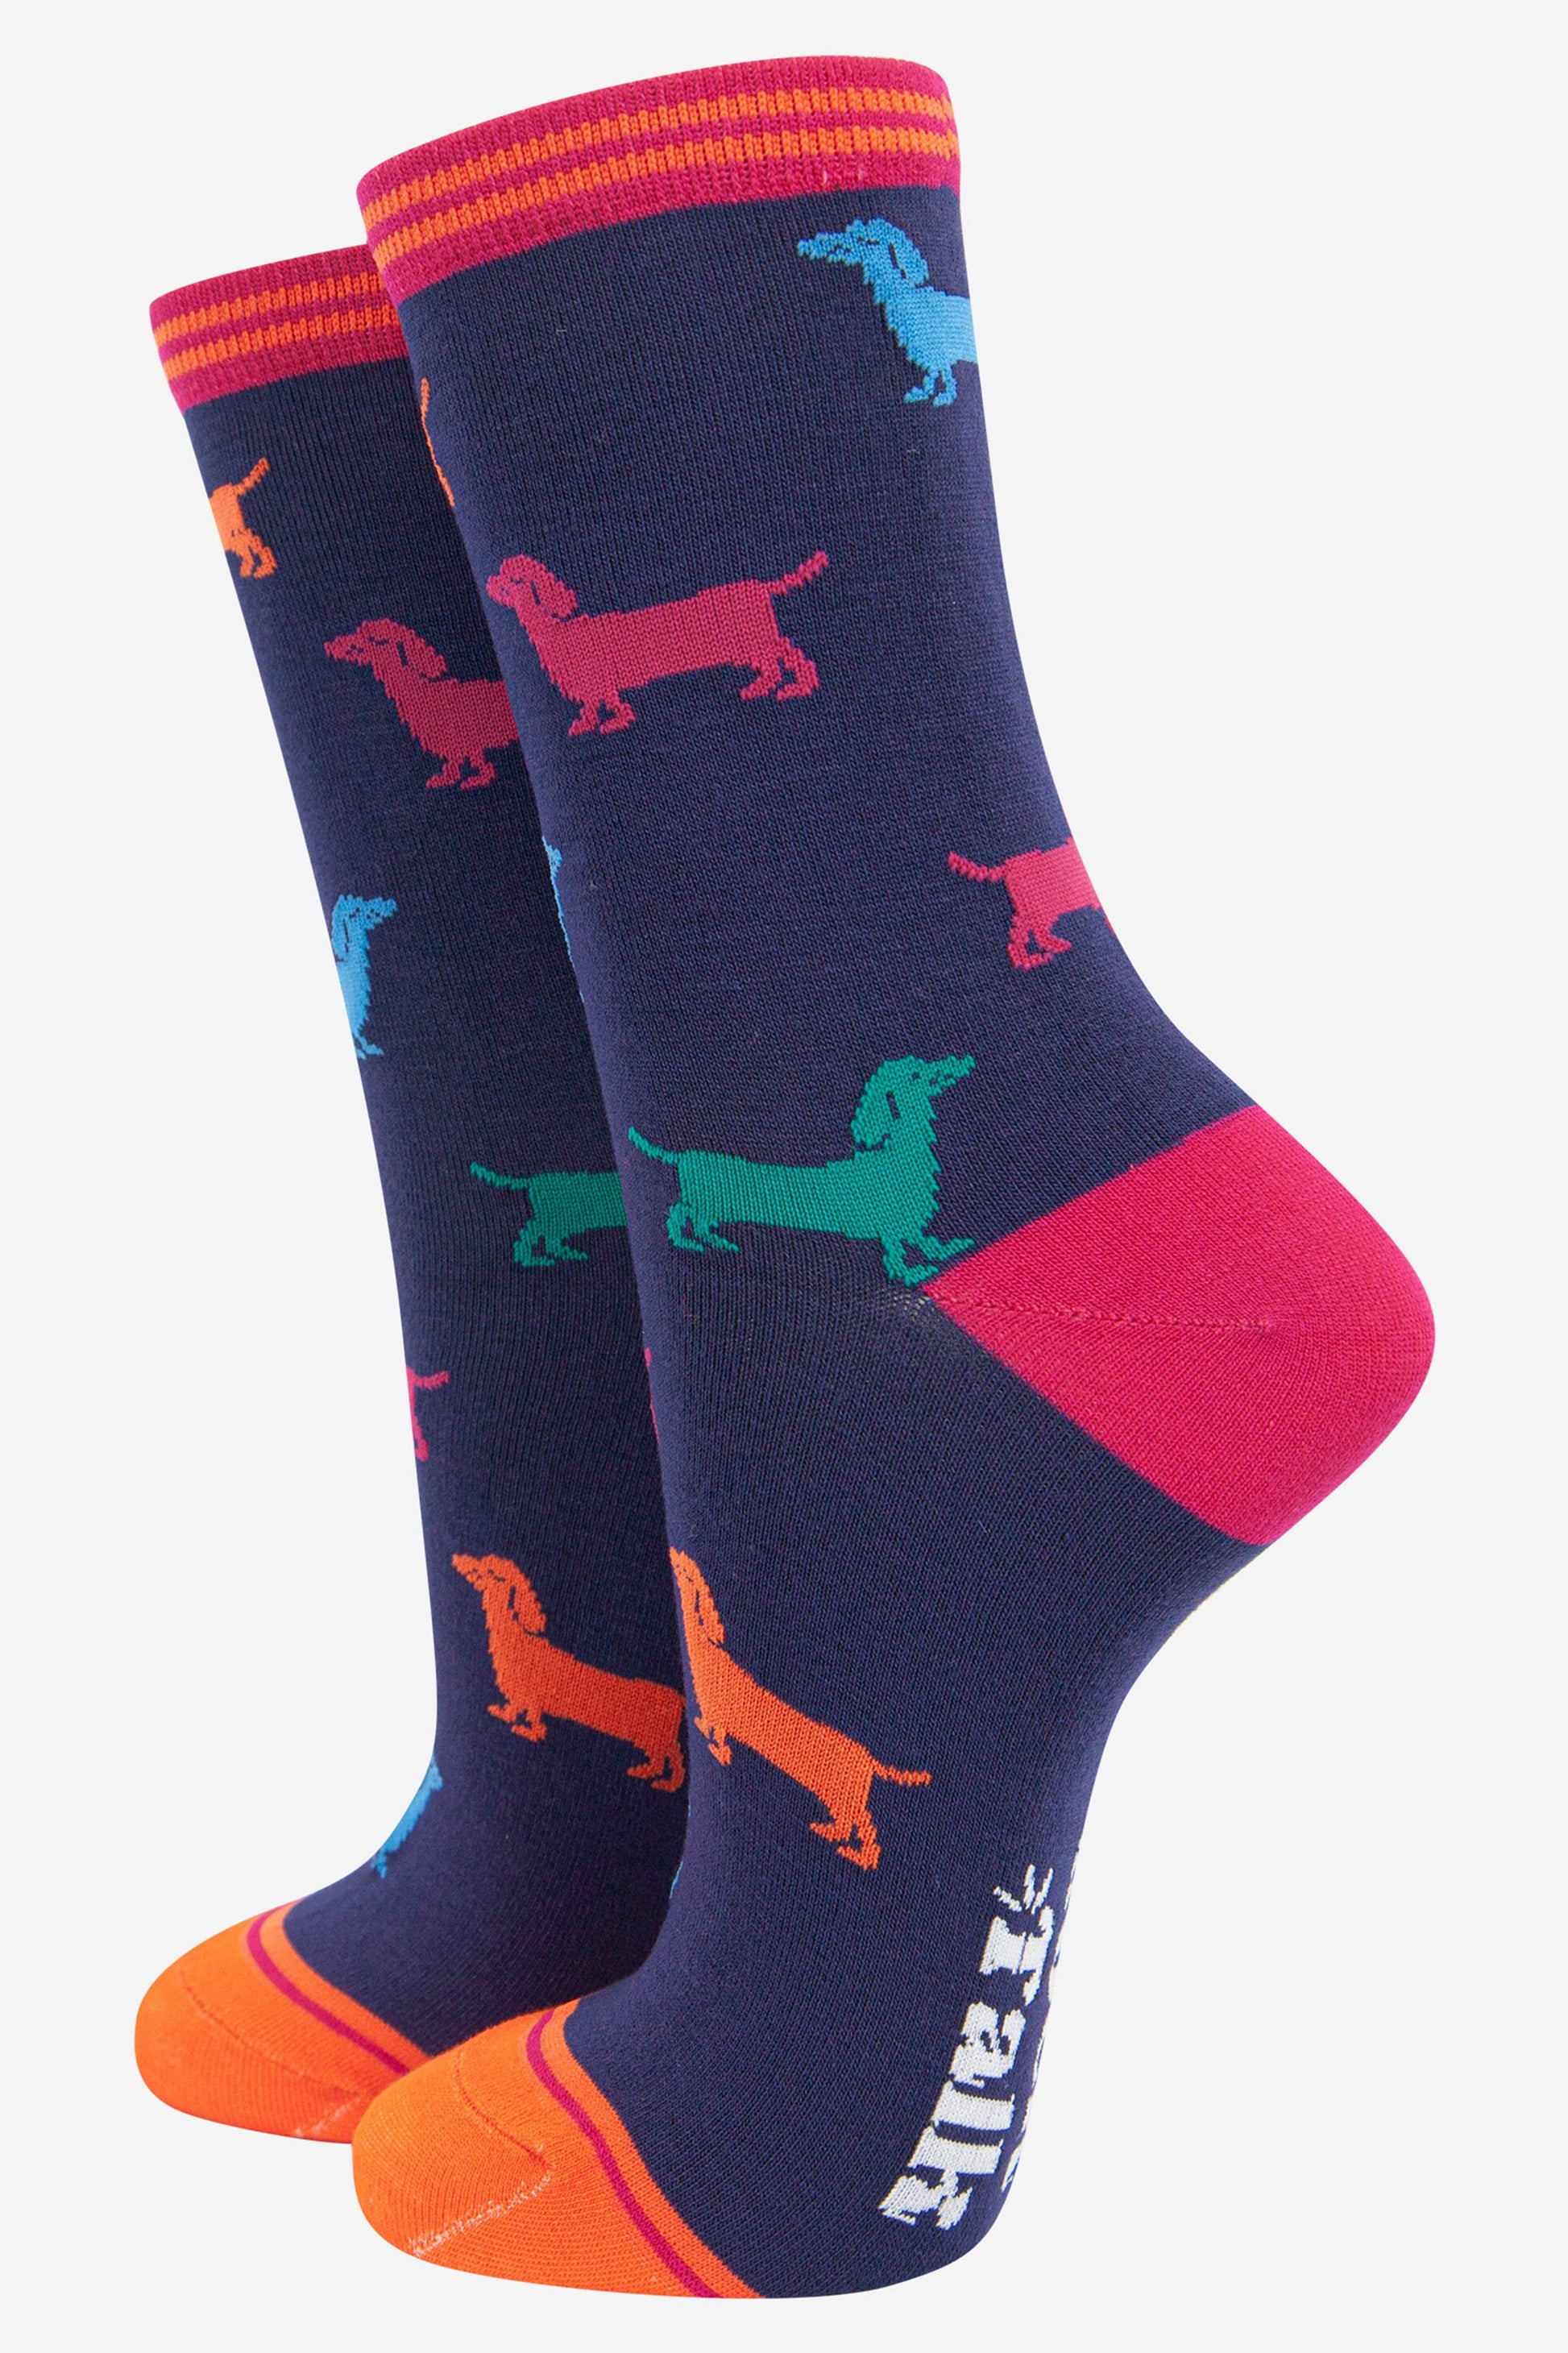 navy blue and pink bamboo ankle socks featuring multicoloured sausage dogs and a striped cuff